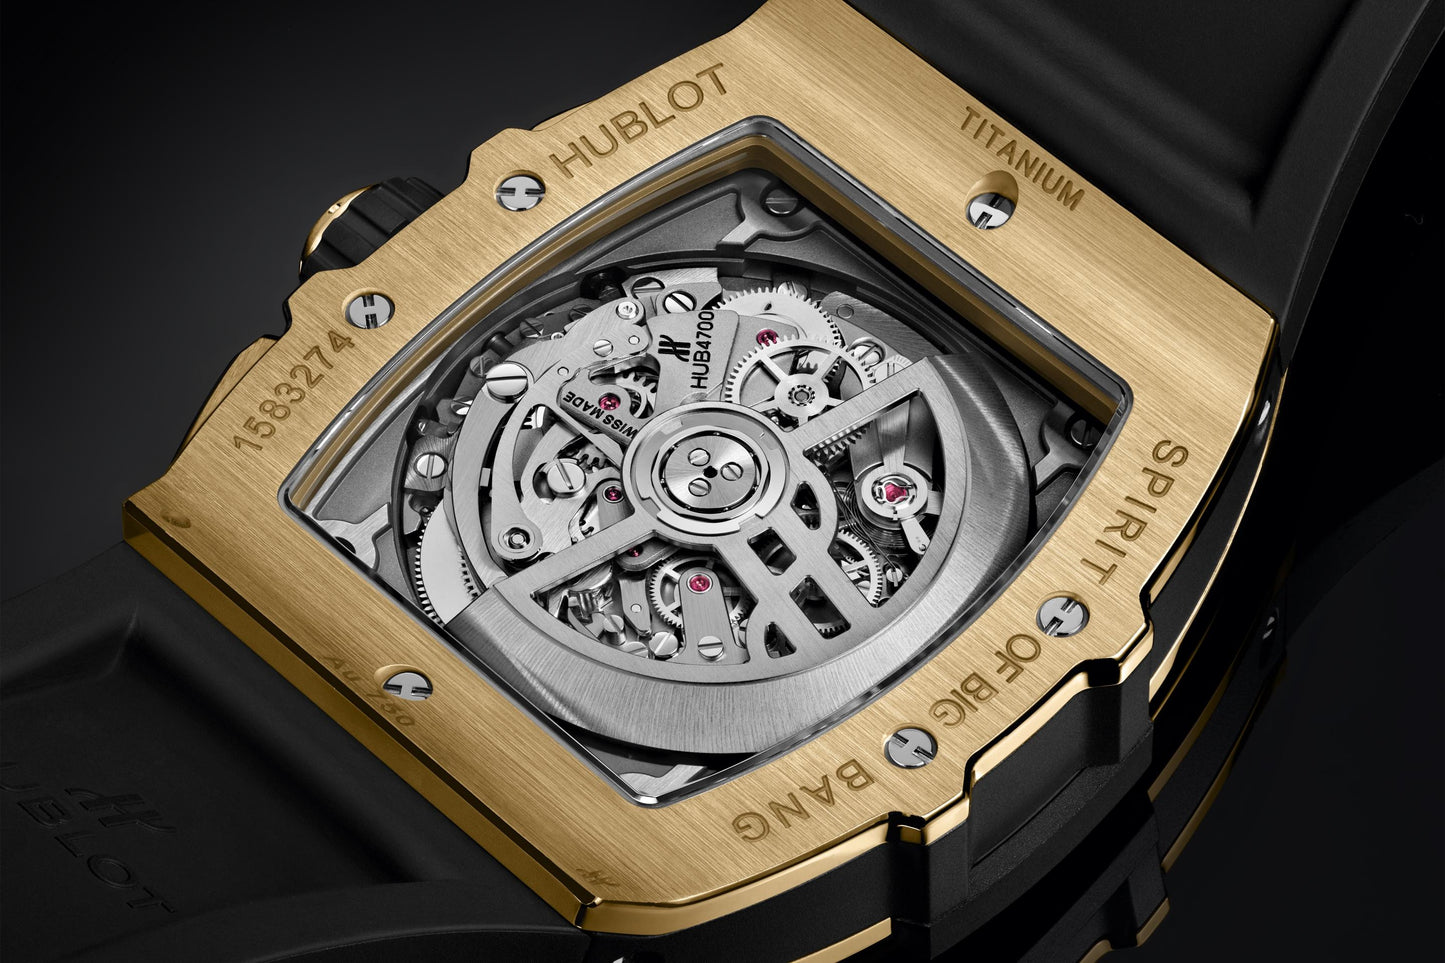 RETURN TO THE ORIGINS OF YELLOW GOLD: HUBLOT RECONNECTS WITH ITS FOUNDING  SPIRIT